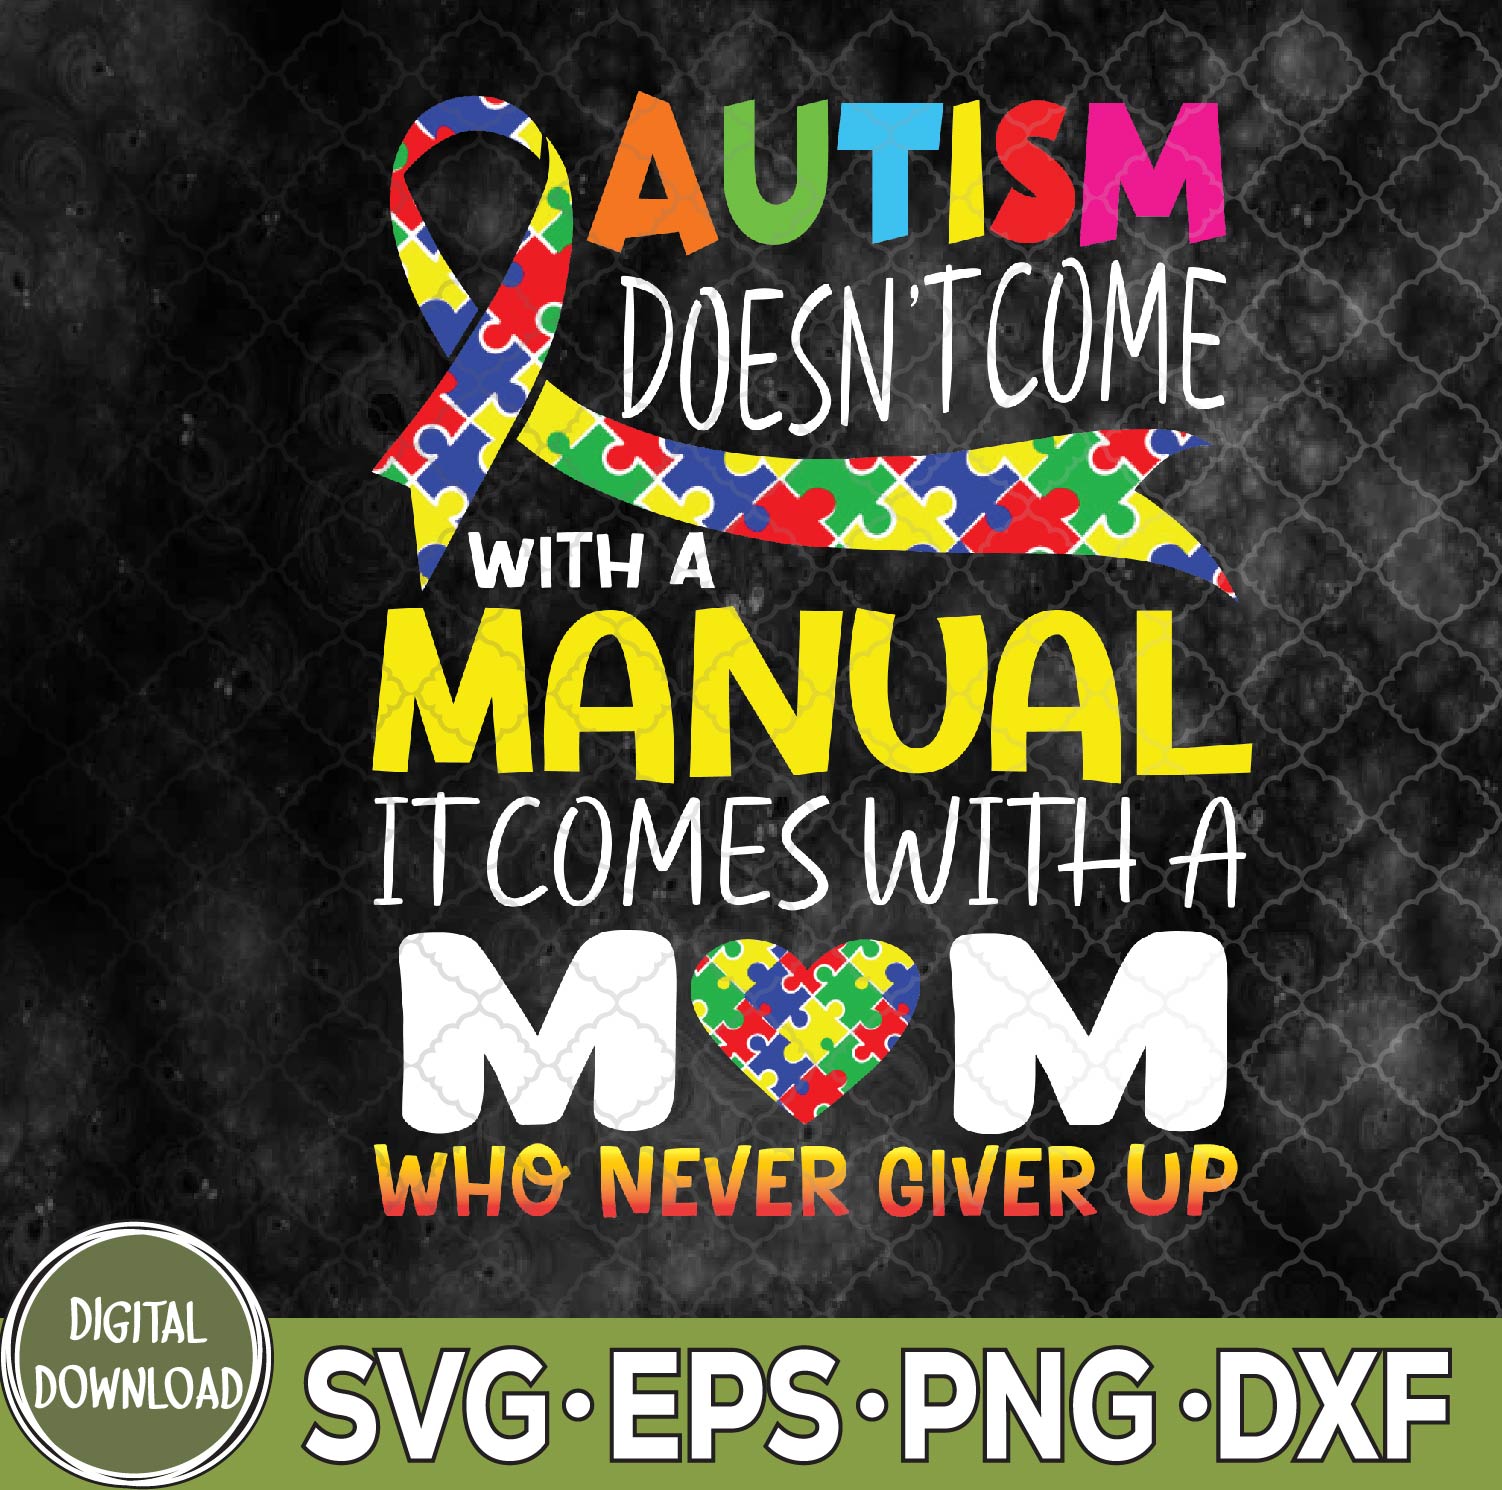 WTMNEW9file 09 134 Autism Awareness Mom Autism Doesn't Come With A Manual svg, Autism Awareness svg, Doesn't Come With A Manual Svg, Eps, Png, Dxf